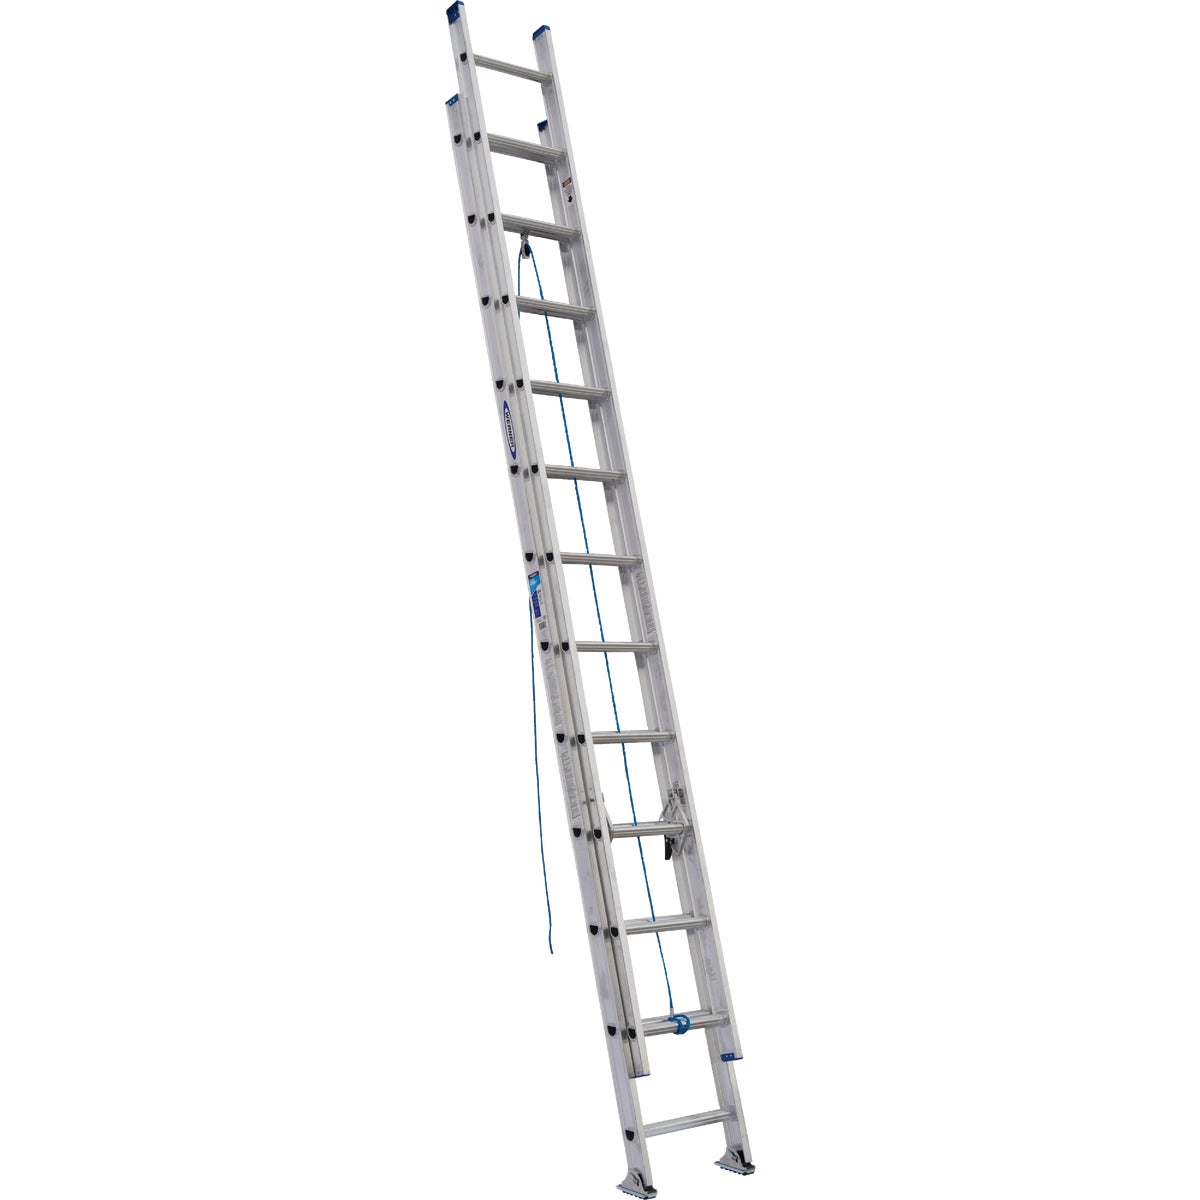 Werner 24 Ft. Aluminum Extension Ladder with 250 Lb. Load Capacity Type I Duty Rating